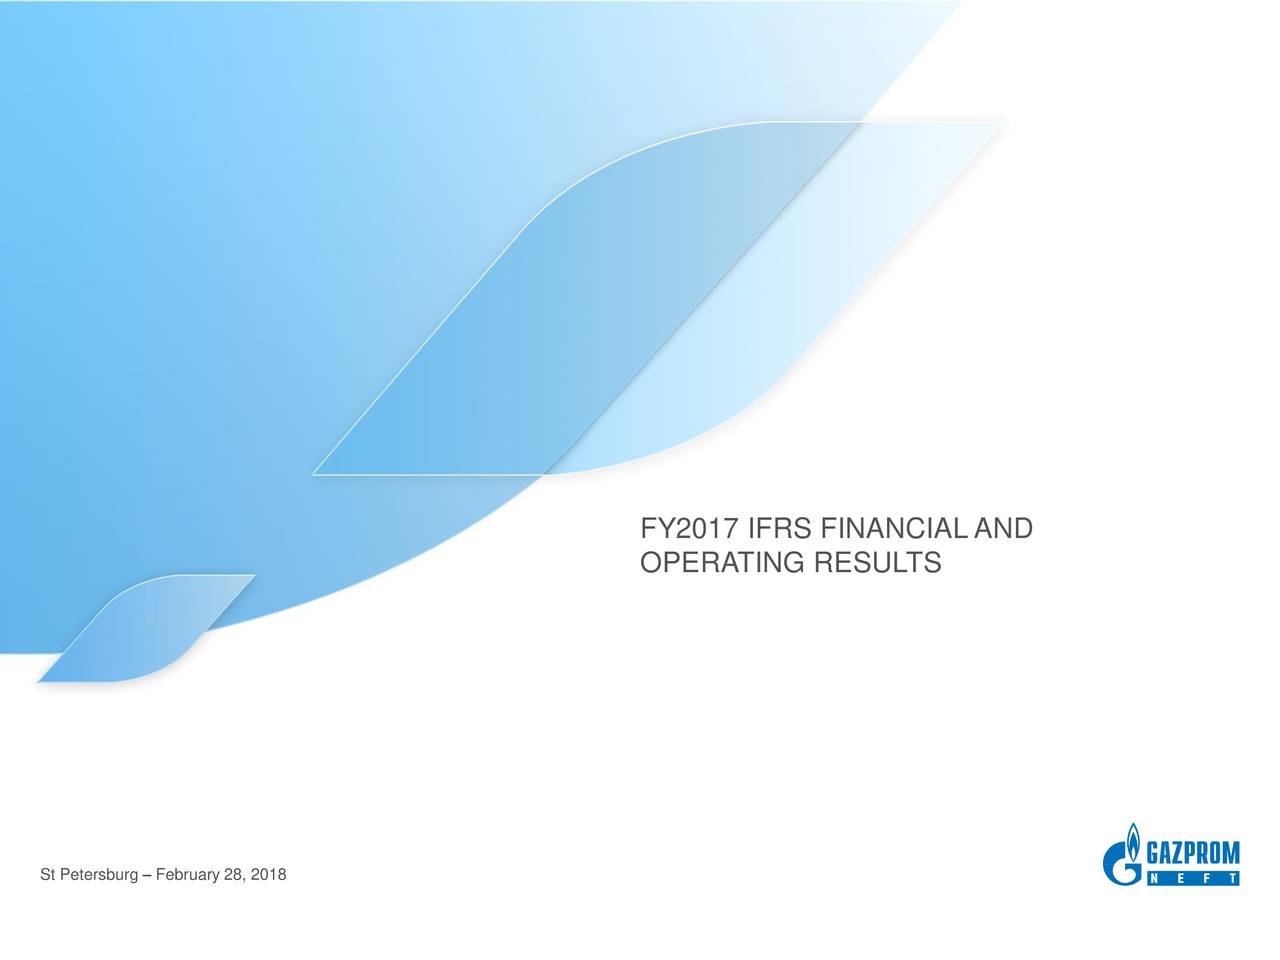 FY2017 IFRS FINANCIAL AND